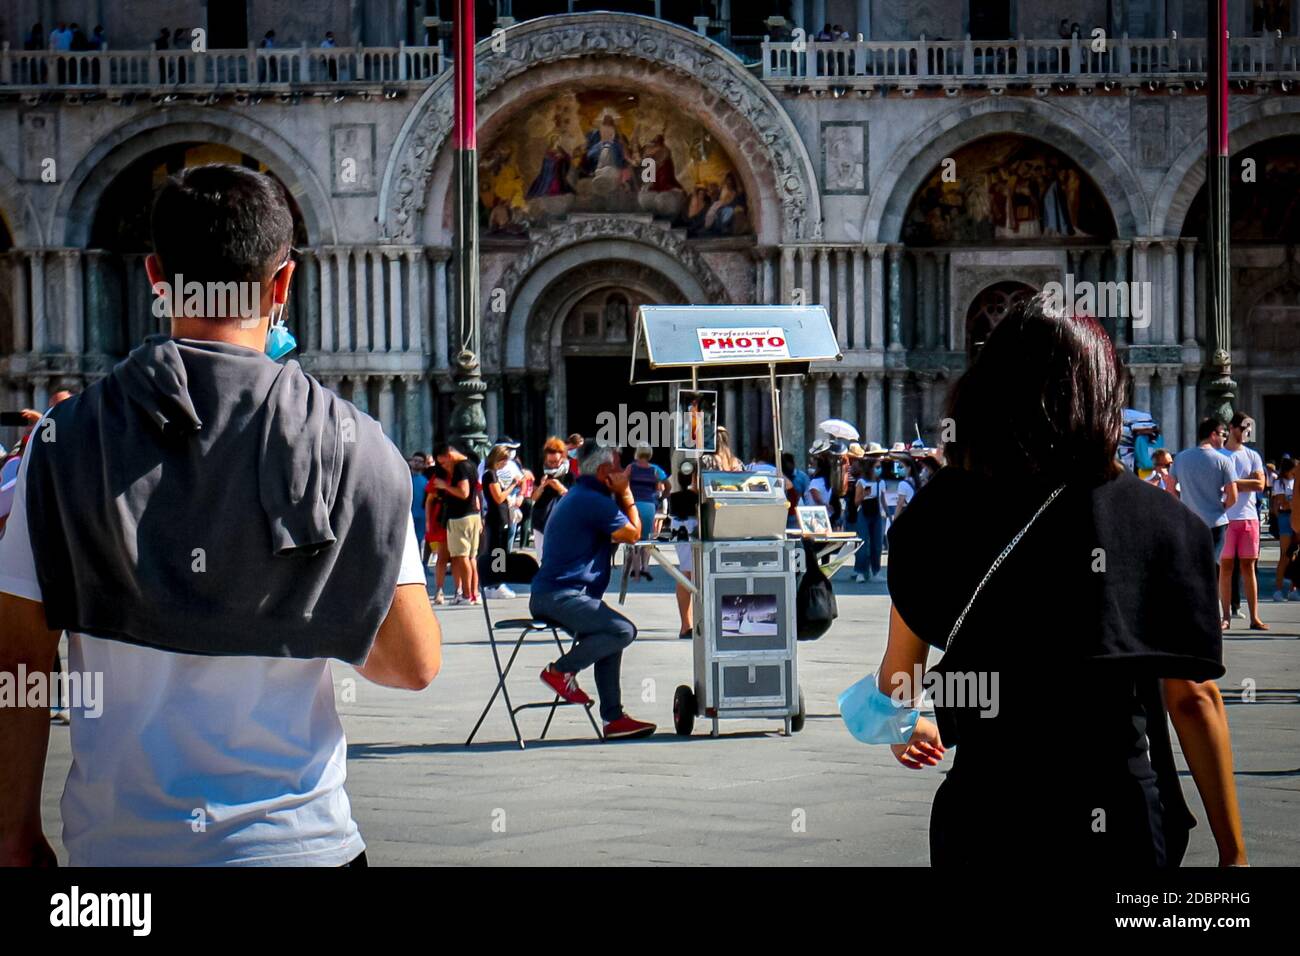 Venice tourists with surgical masks walk towards St Mark's Basilica and a man selling professional photographs during coronavirus crisis in Italy. Stock Photo